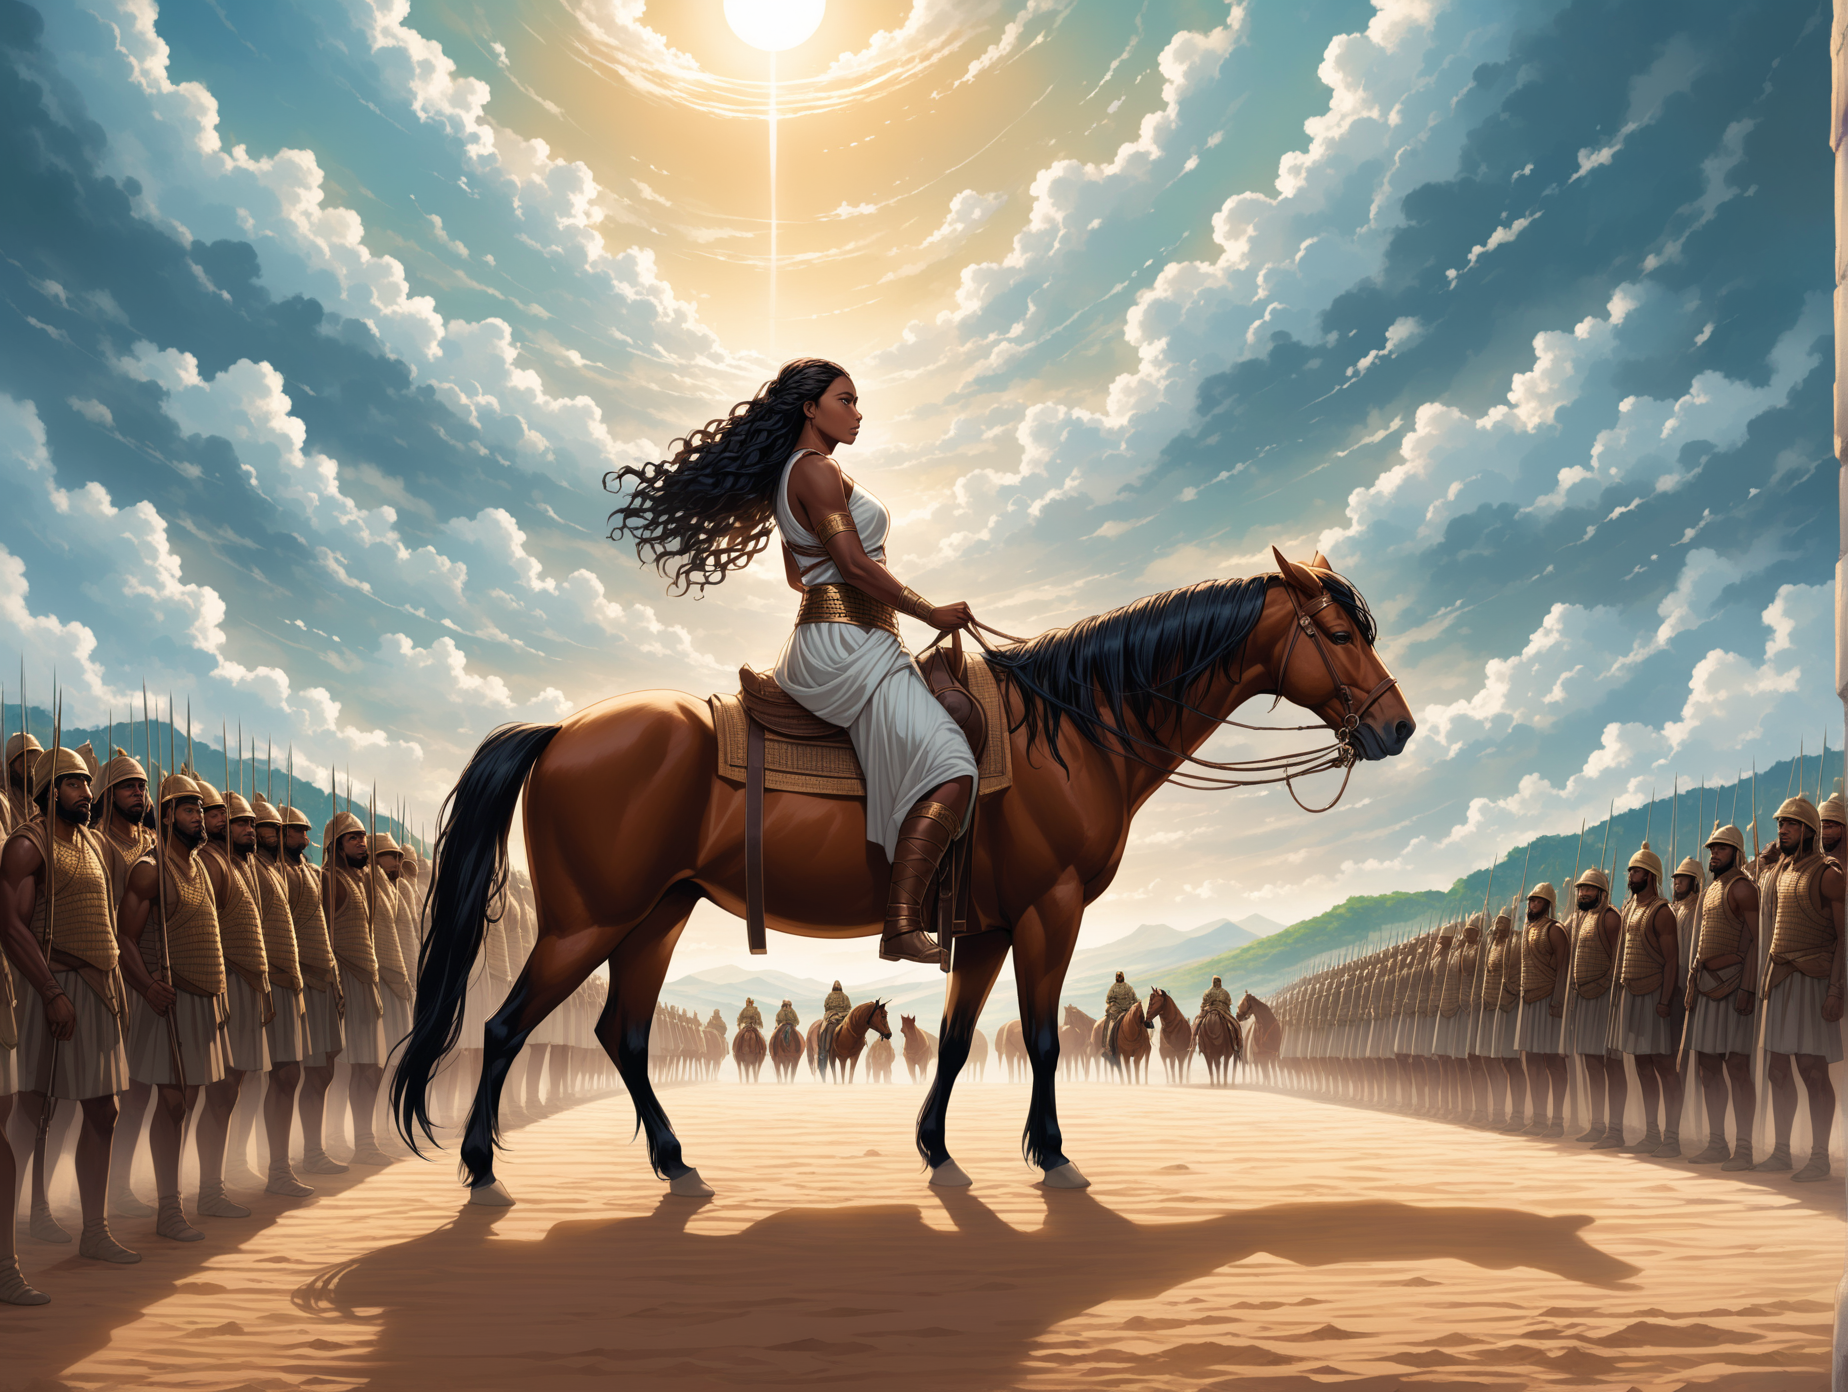 Create a digital art illustration, a colorful scene with blue skies and green backdrop of the heart of an ancient battlefield, under a sky heavy with foreboding clouds, a scene of stark contrast unfolds. Atop a rugged mountain, an African American woman with long curly hair of regal bearing and serene authority sits gracefully upon a horse. Her gaze, both commanding and wise, is fixed on the vast expanse below where history is being written in the sand. On the ground, an African American handsome man with braided hair stands resolute, clad in the attire of a biblical warrior, his presence as imposing as it is inspiring. He is not alone; behind him, stretching into the distance, an army of 10,000 men on horseback stands ready, a testament to solidarity and strength. Each soldier, like their leader, is adorned in the traditional garb of their time, prepared to follow him into the annals of legend. The landscape around them is a testament to the epic scale of their undertaking, with the rugged terrain serving as both witness and participant in the unfolding drama. This moment, captured in the stillness before the storm, speaks to the enduring human spirit, leadership, and the timeless narrative of conflict and courage.
